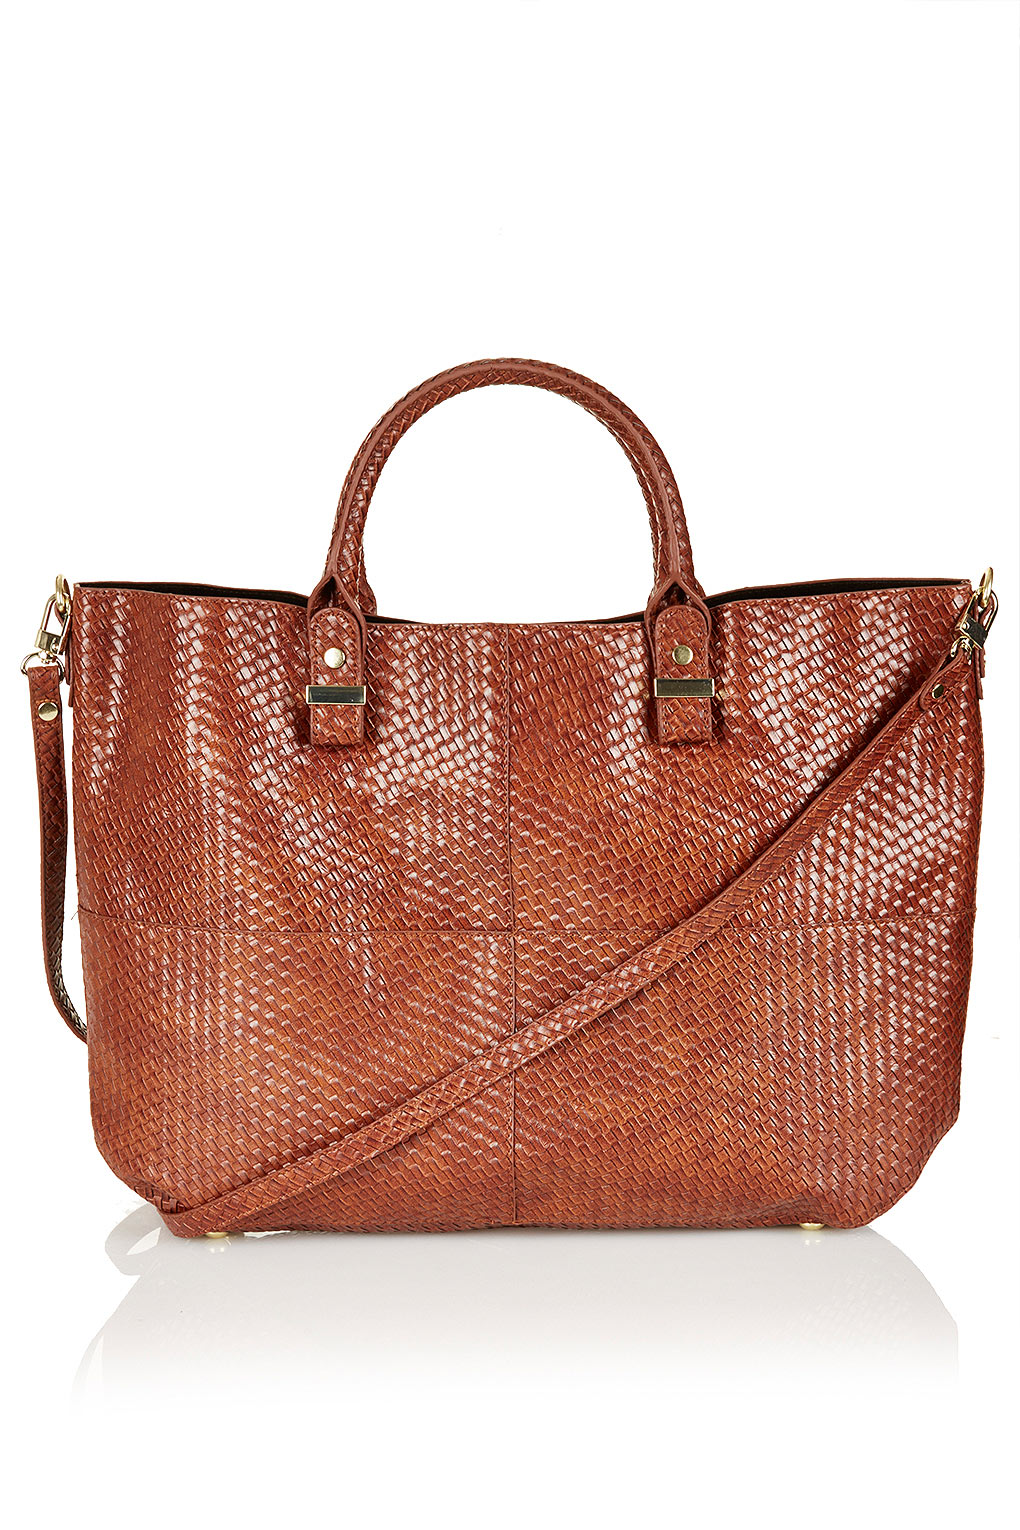 Lyst - Topshop Woven Lady Tote Bag in Brown